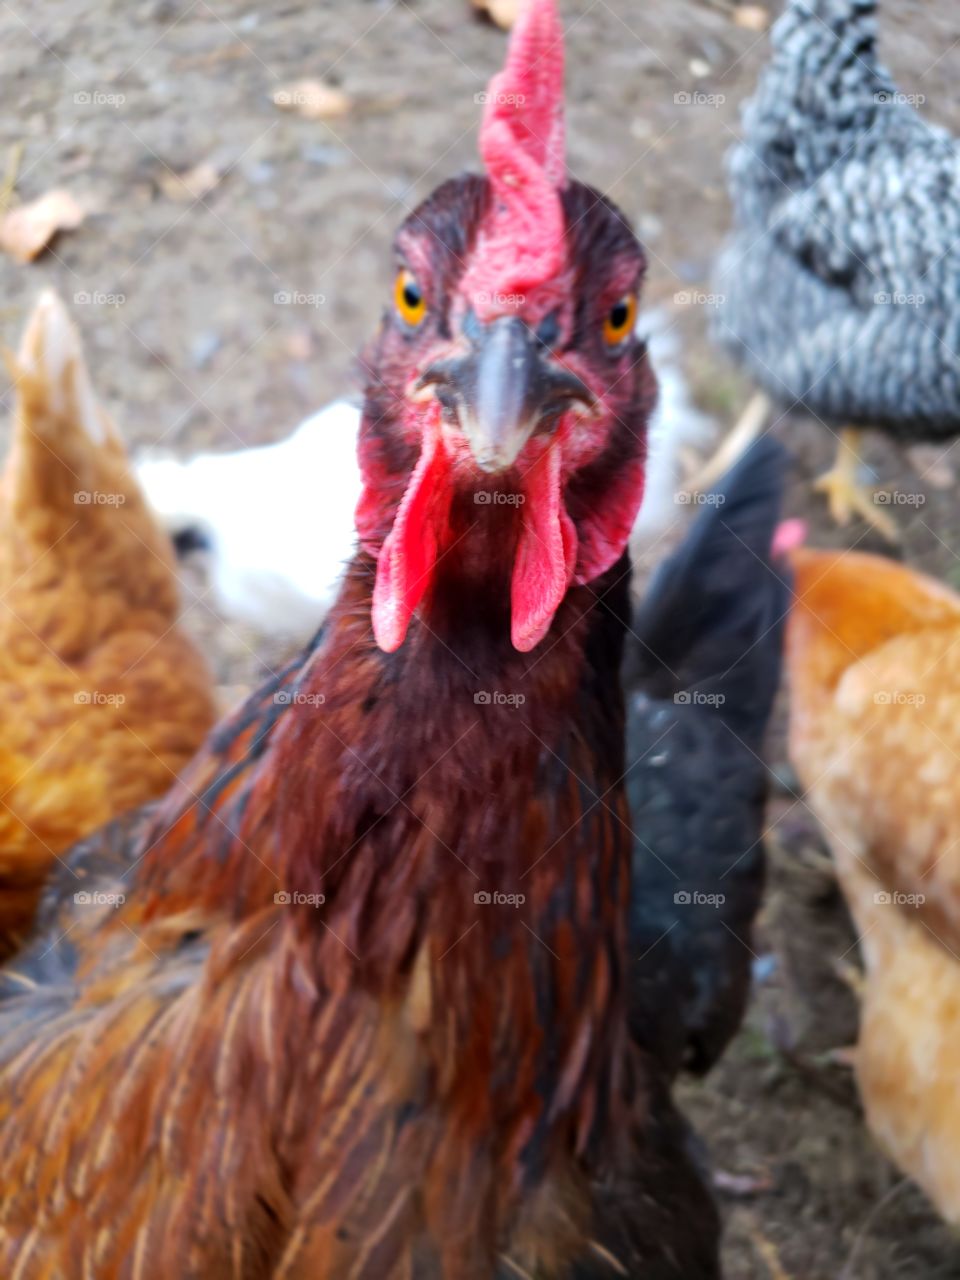 chicken starring at the camera